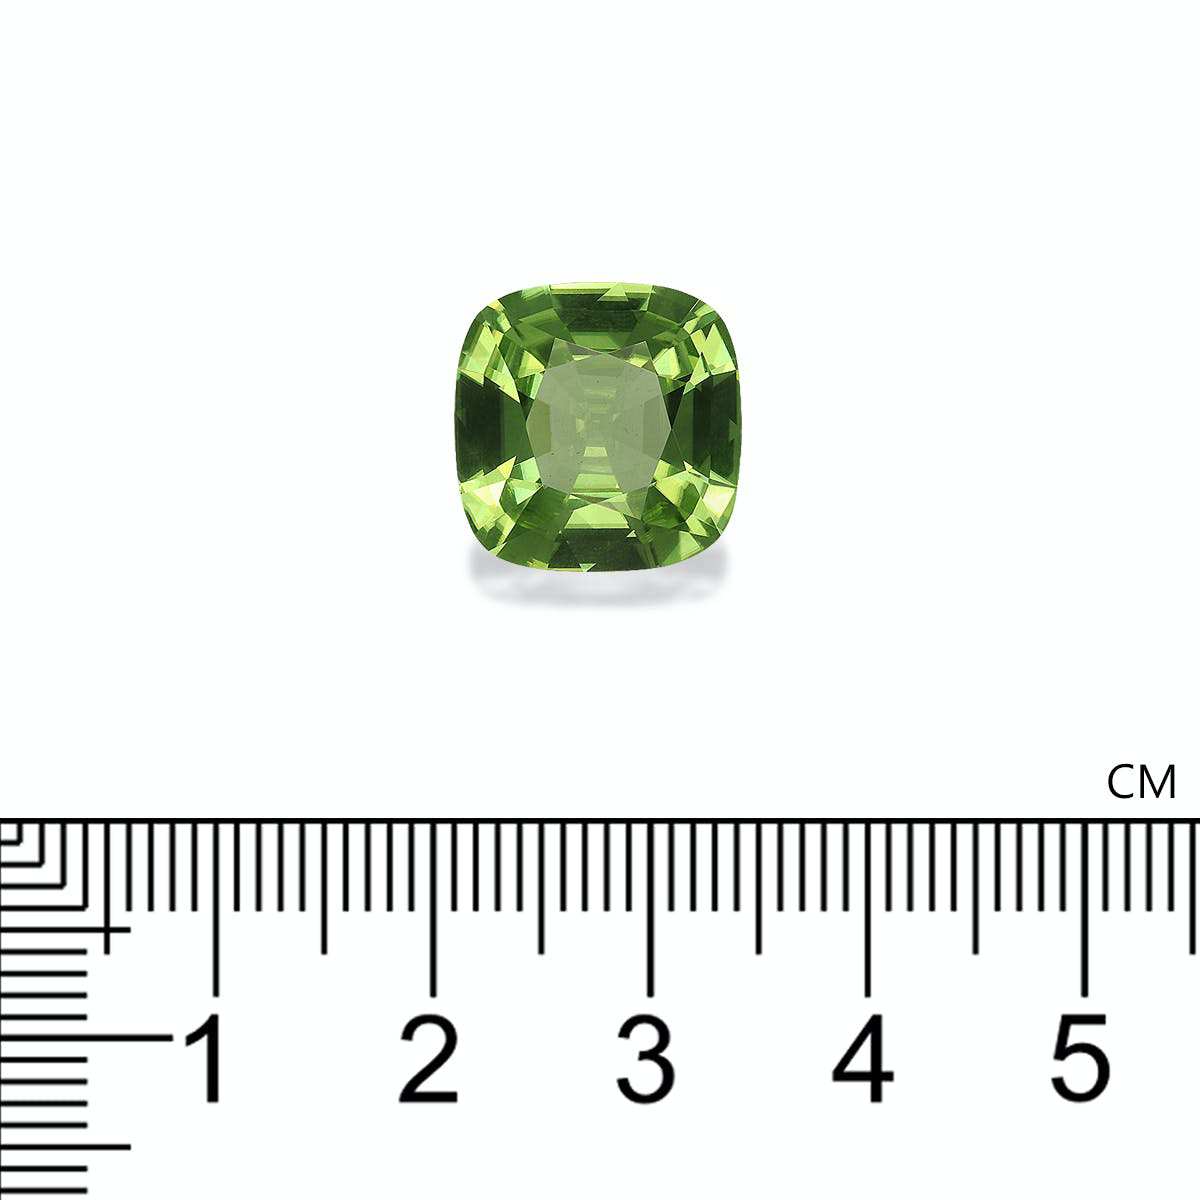 Picture of Lime Green Peridot 8.88ct - 13mm (PD0321)